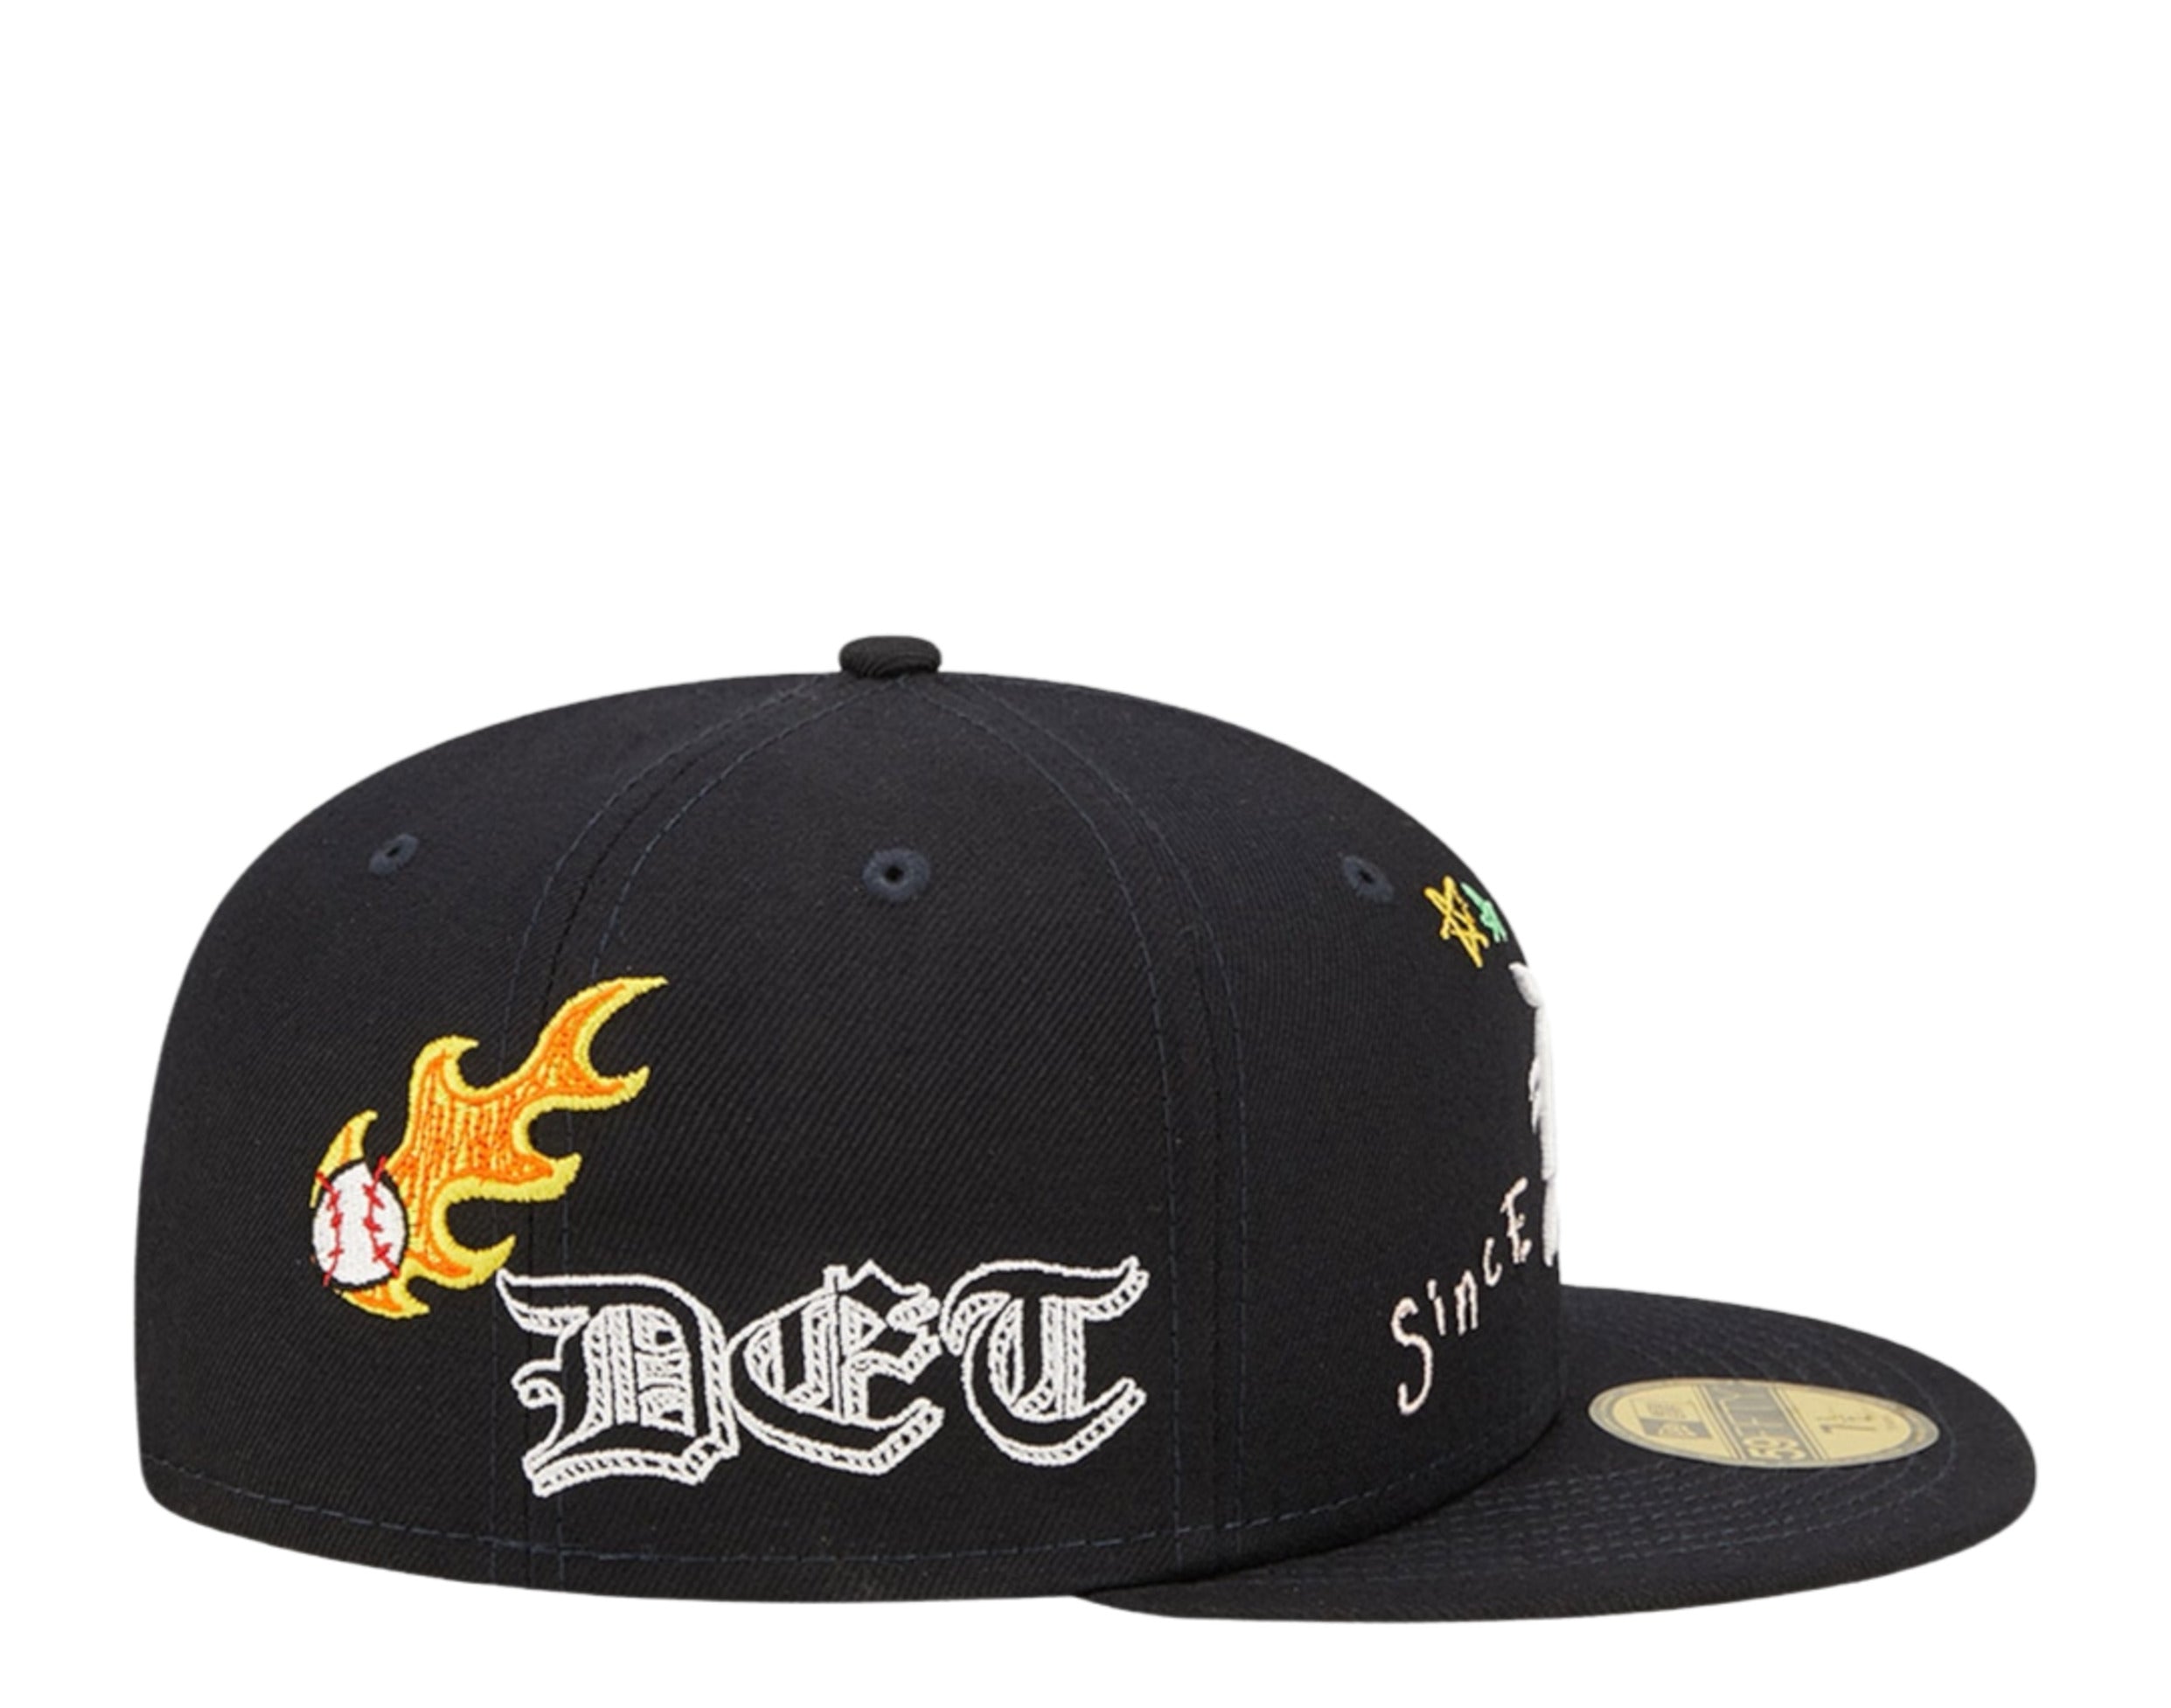 NBL DETROIT TIGERS TWO DIMENSIONAL LOGO FITTED BASEBALL HAT